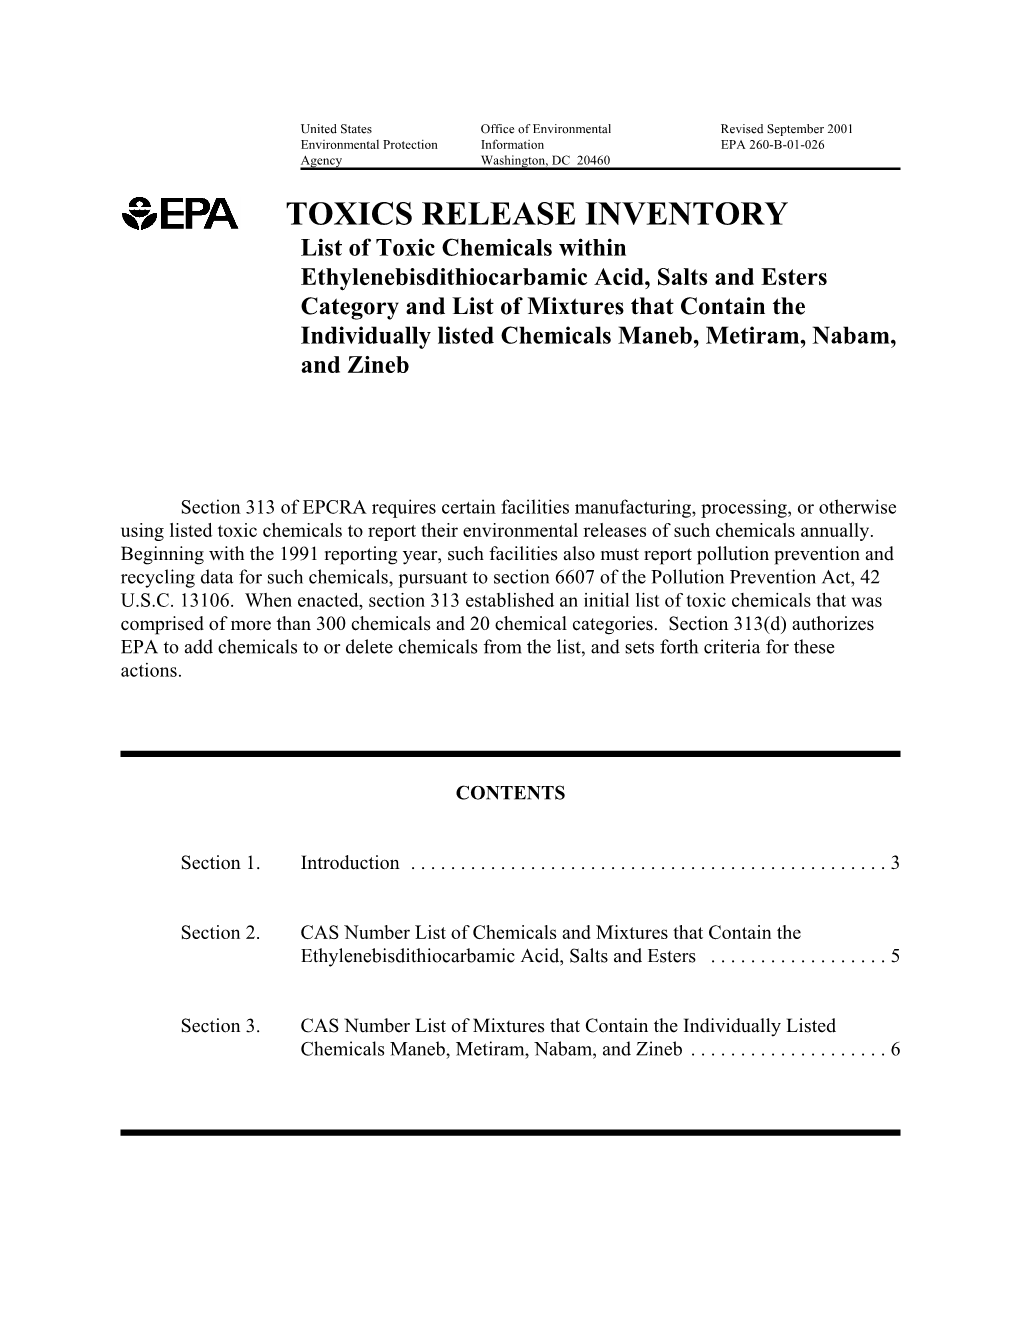 Toxics Release Inventory List of Toxic Chemicals Within